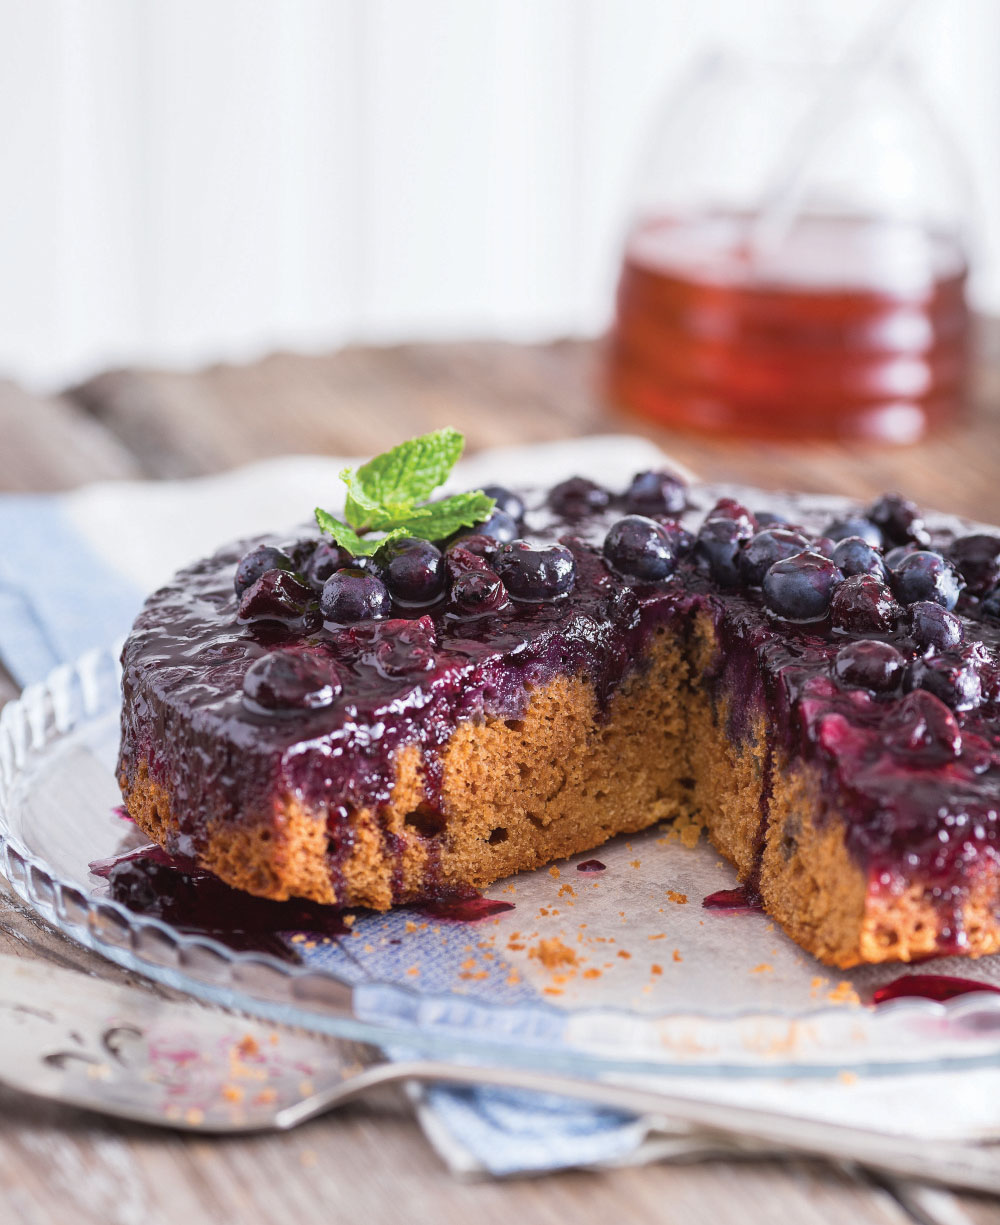 Start with thin layers of cornmeal and blueberries, sprinkled with flour, filled with delicious batter, and for dramatic flair, invert the baked coffeecake for a crown of beautiful blueberries.